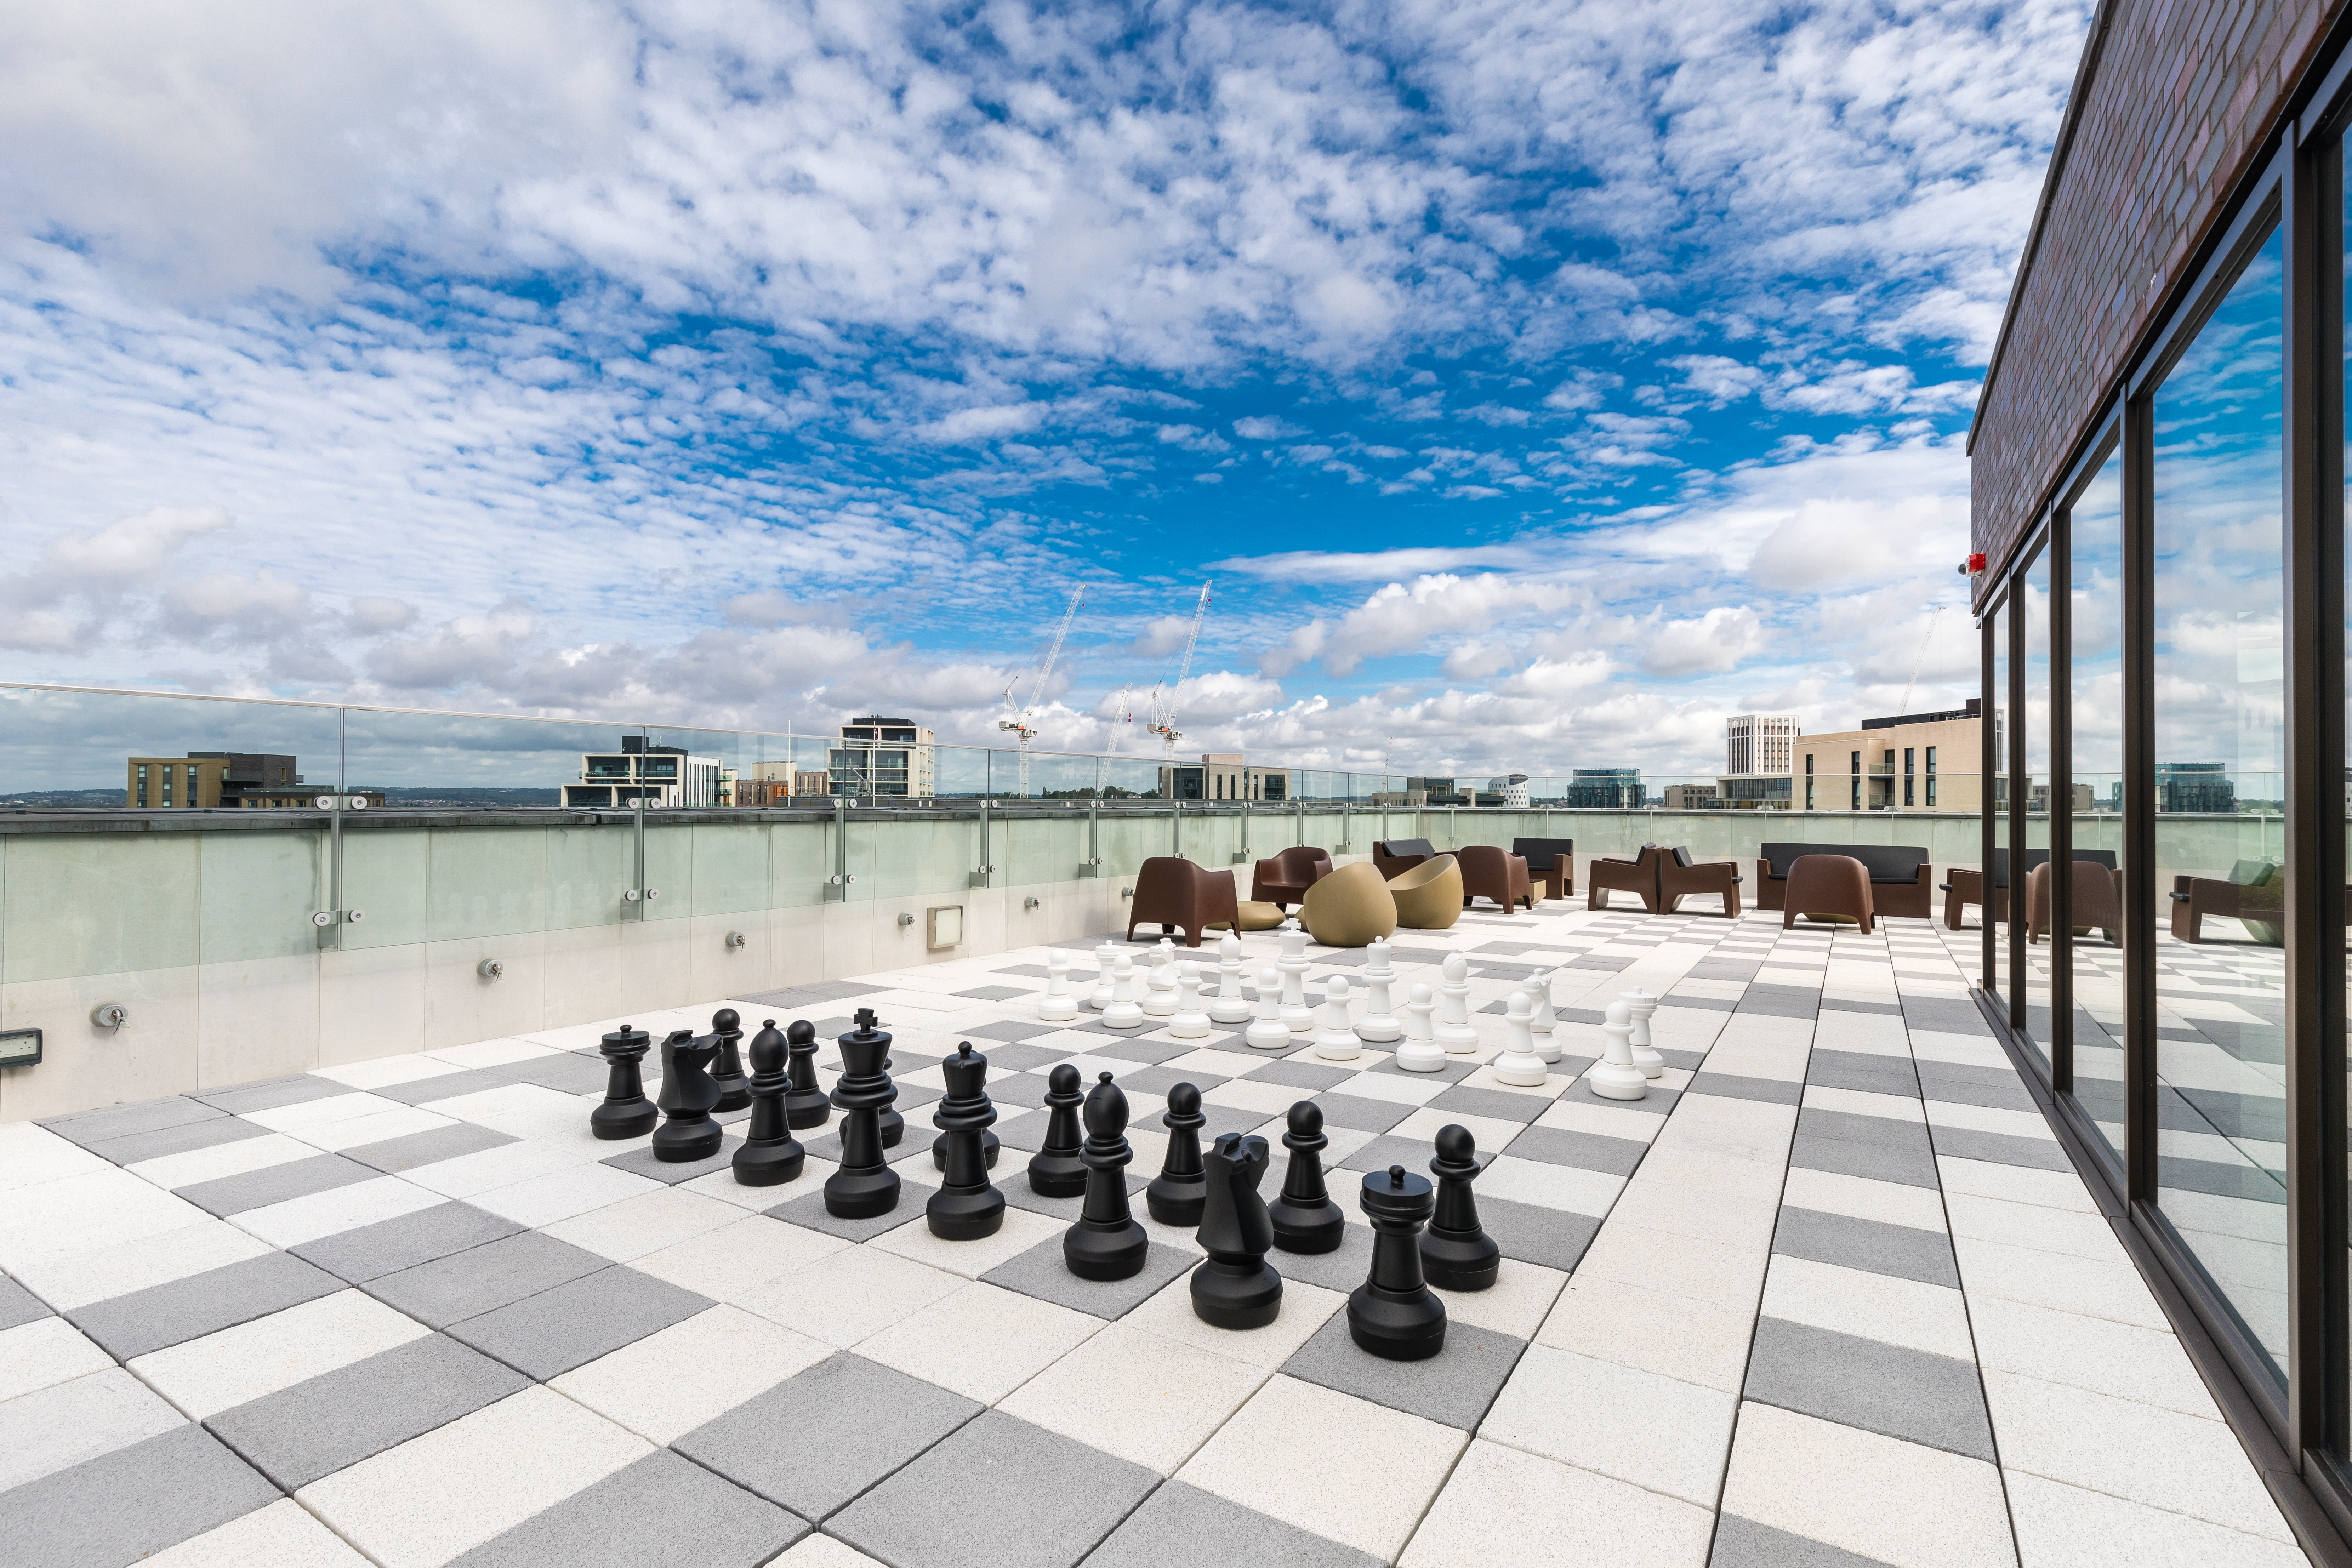 roof garden with giant chessboard